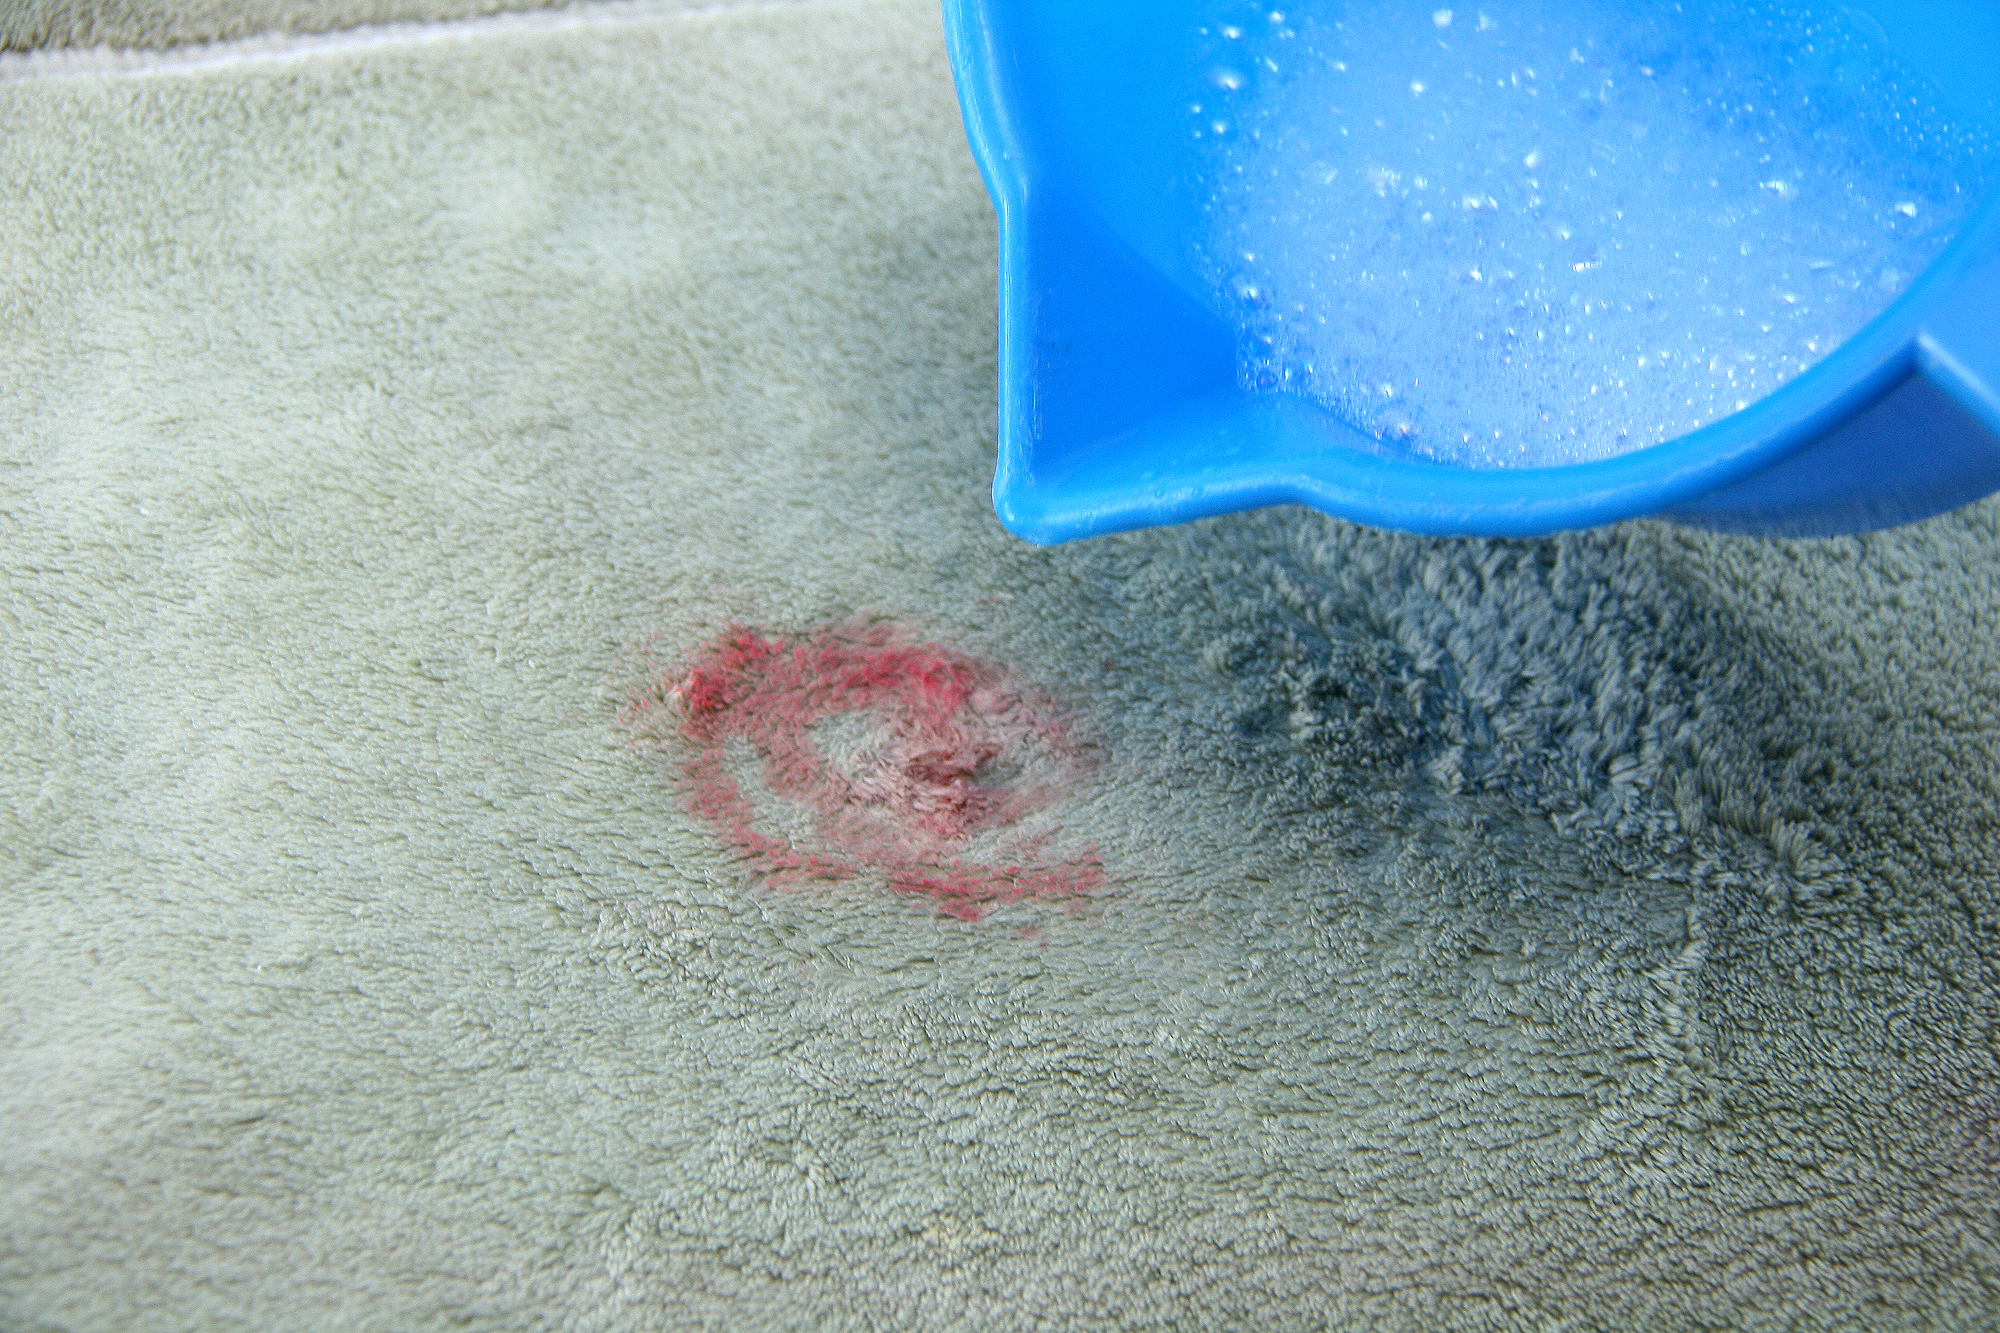 Removing Gum from Carpet - Learn These Tips